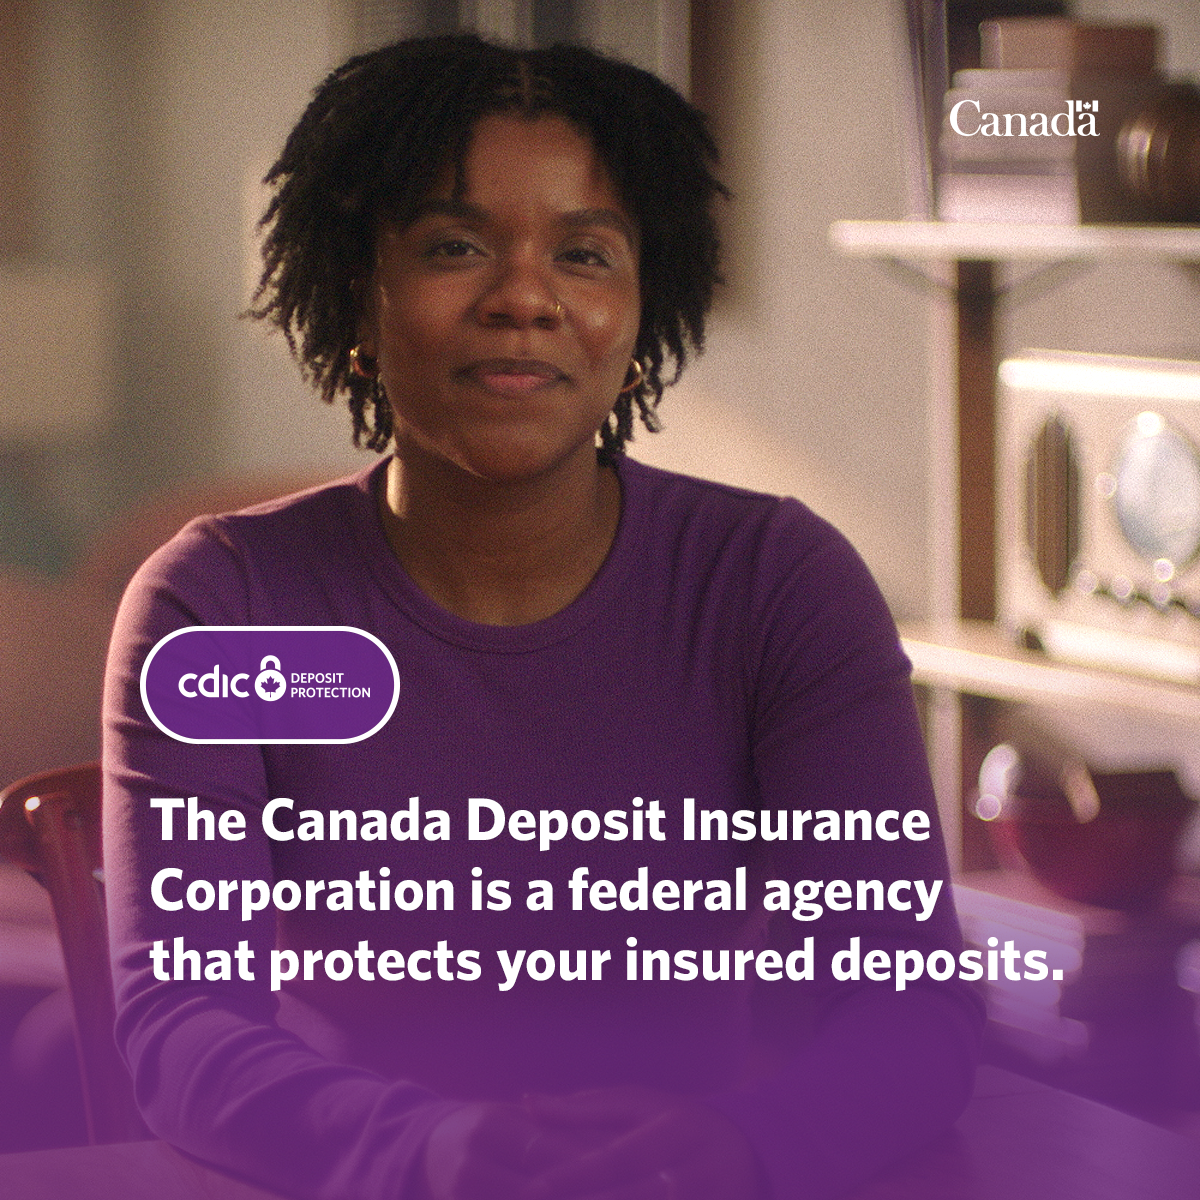 The Canada Deposit Insurance Corporation is a federal agency taht protects your eligible deposits.